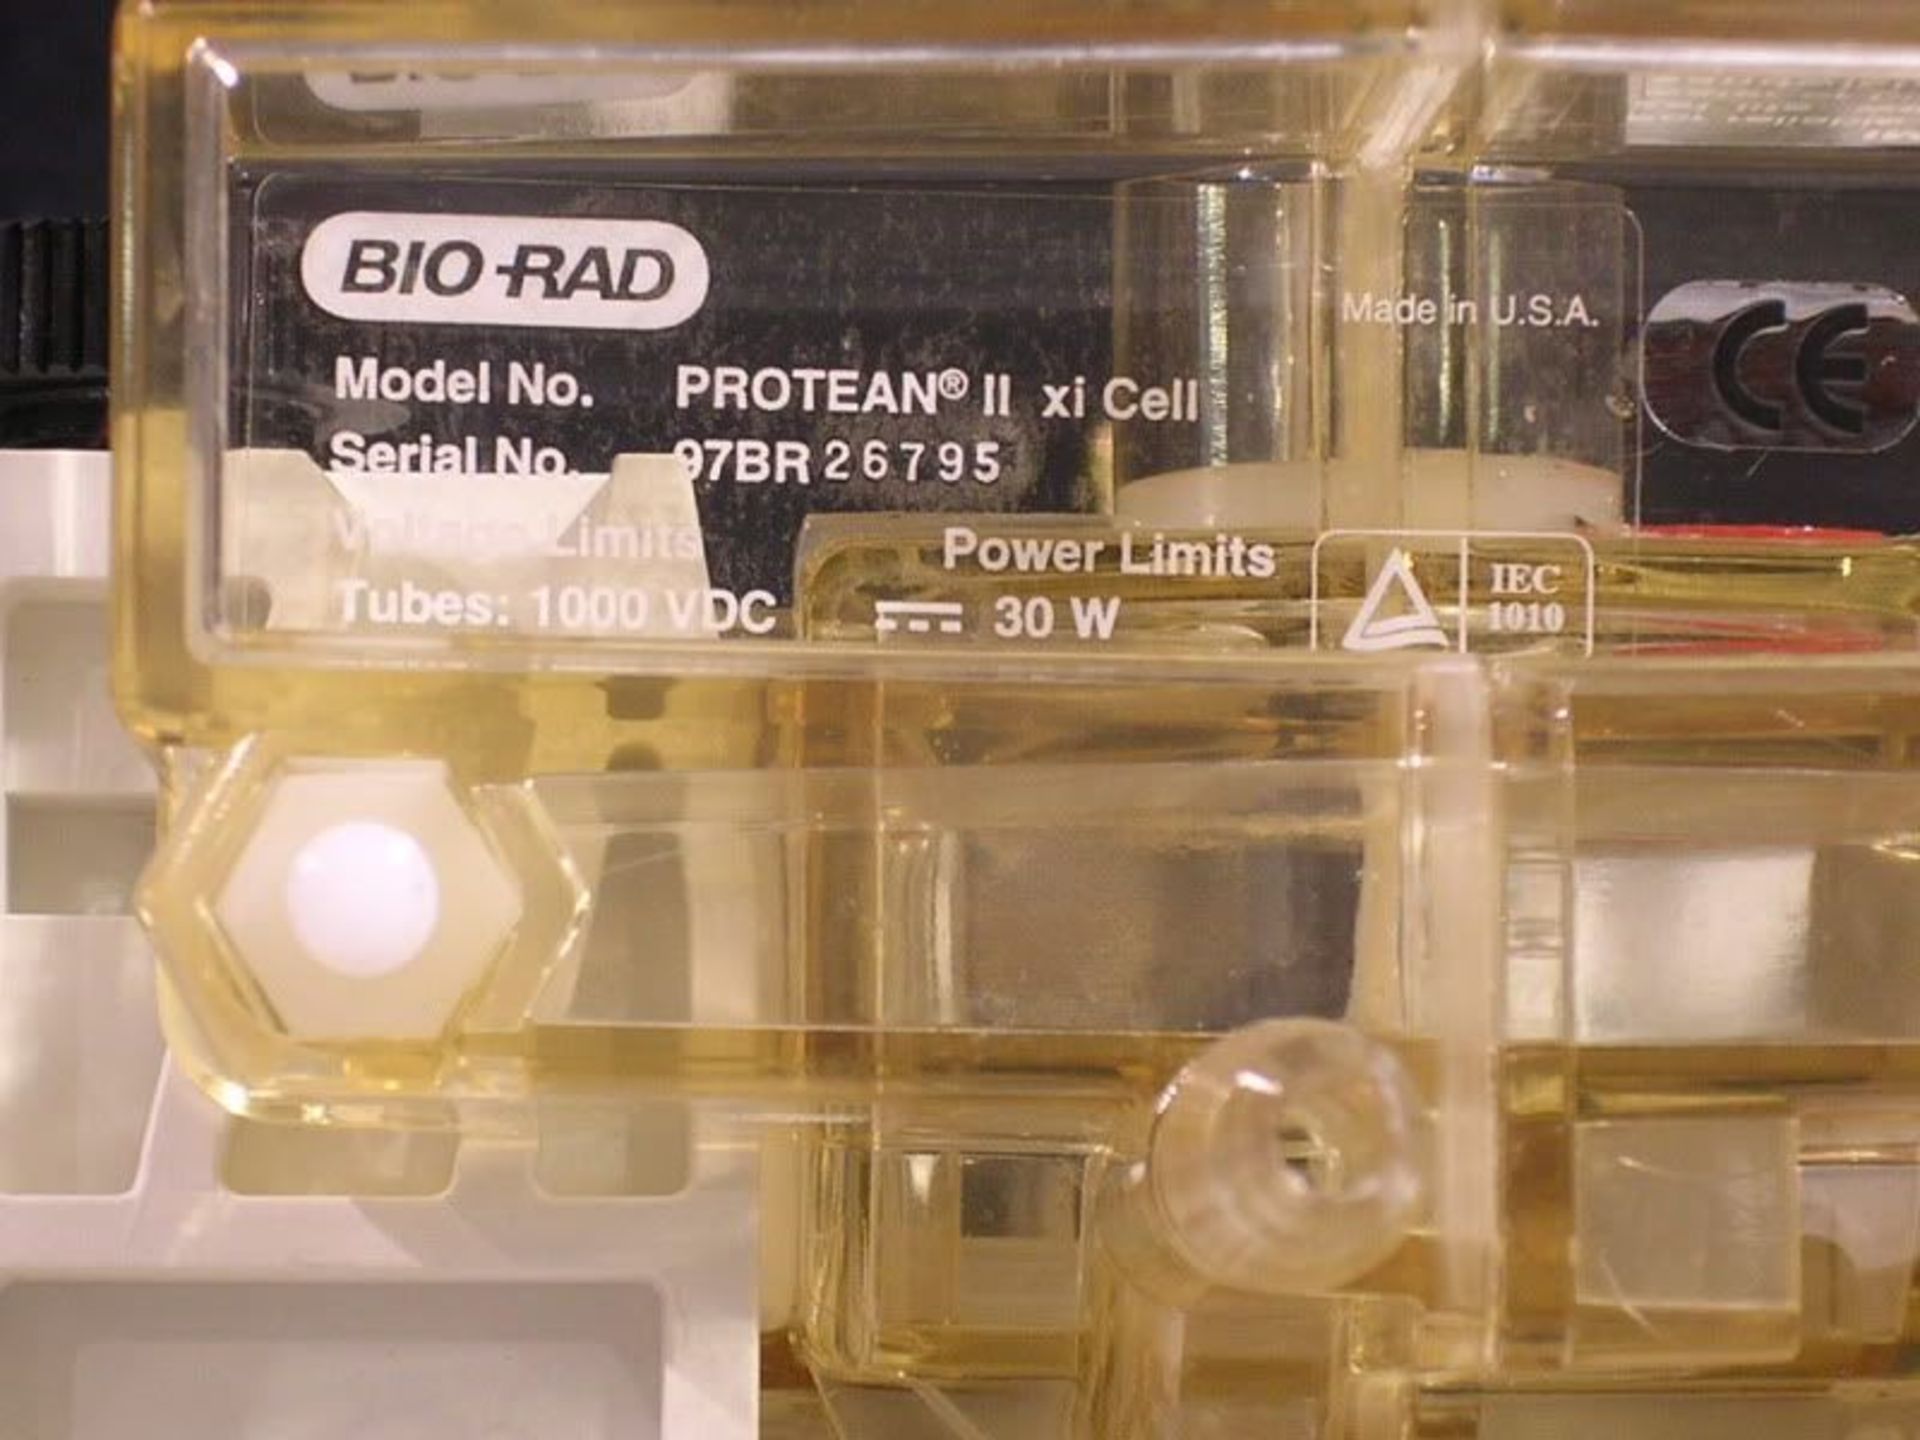 BIO RAD Protean II xi Cell, Electrophoresis Cell, Qty 1, 331948552928 - Image 5 of 5